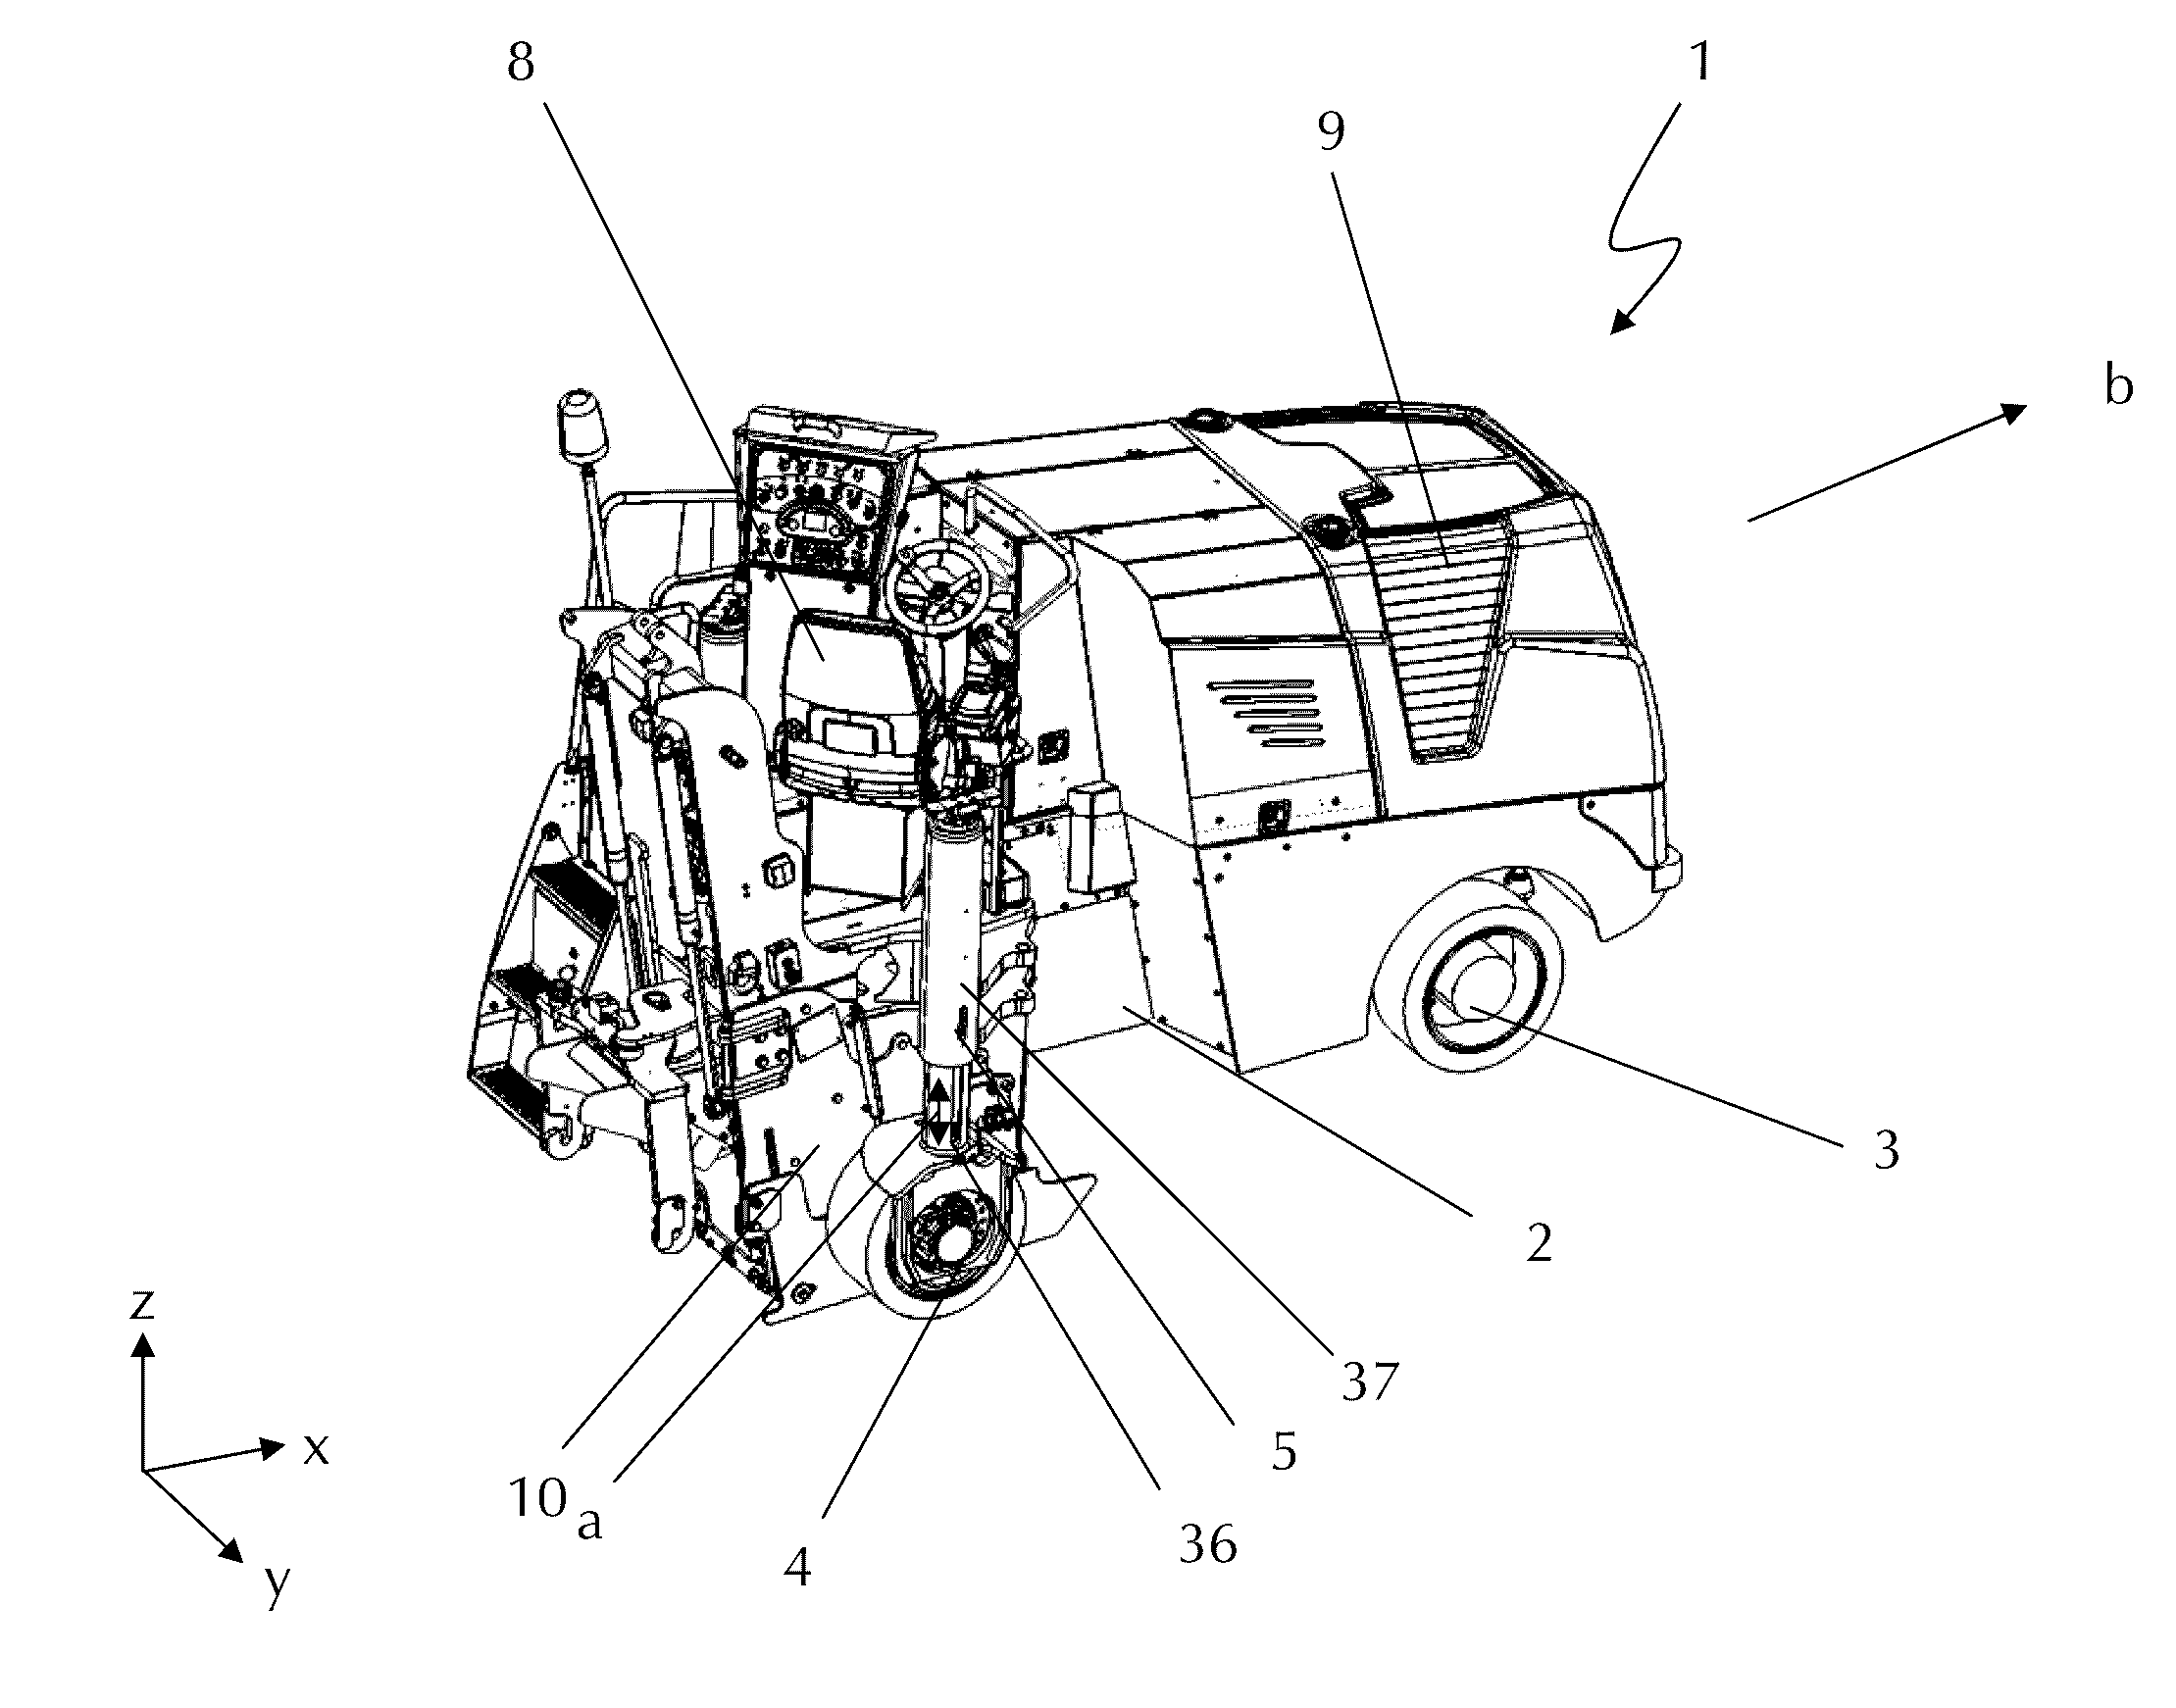 Construction Machine And A Method For Controlling And/Or Monitoring The Milling Depth Of A Construction Machine